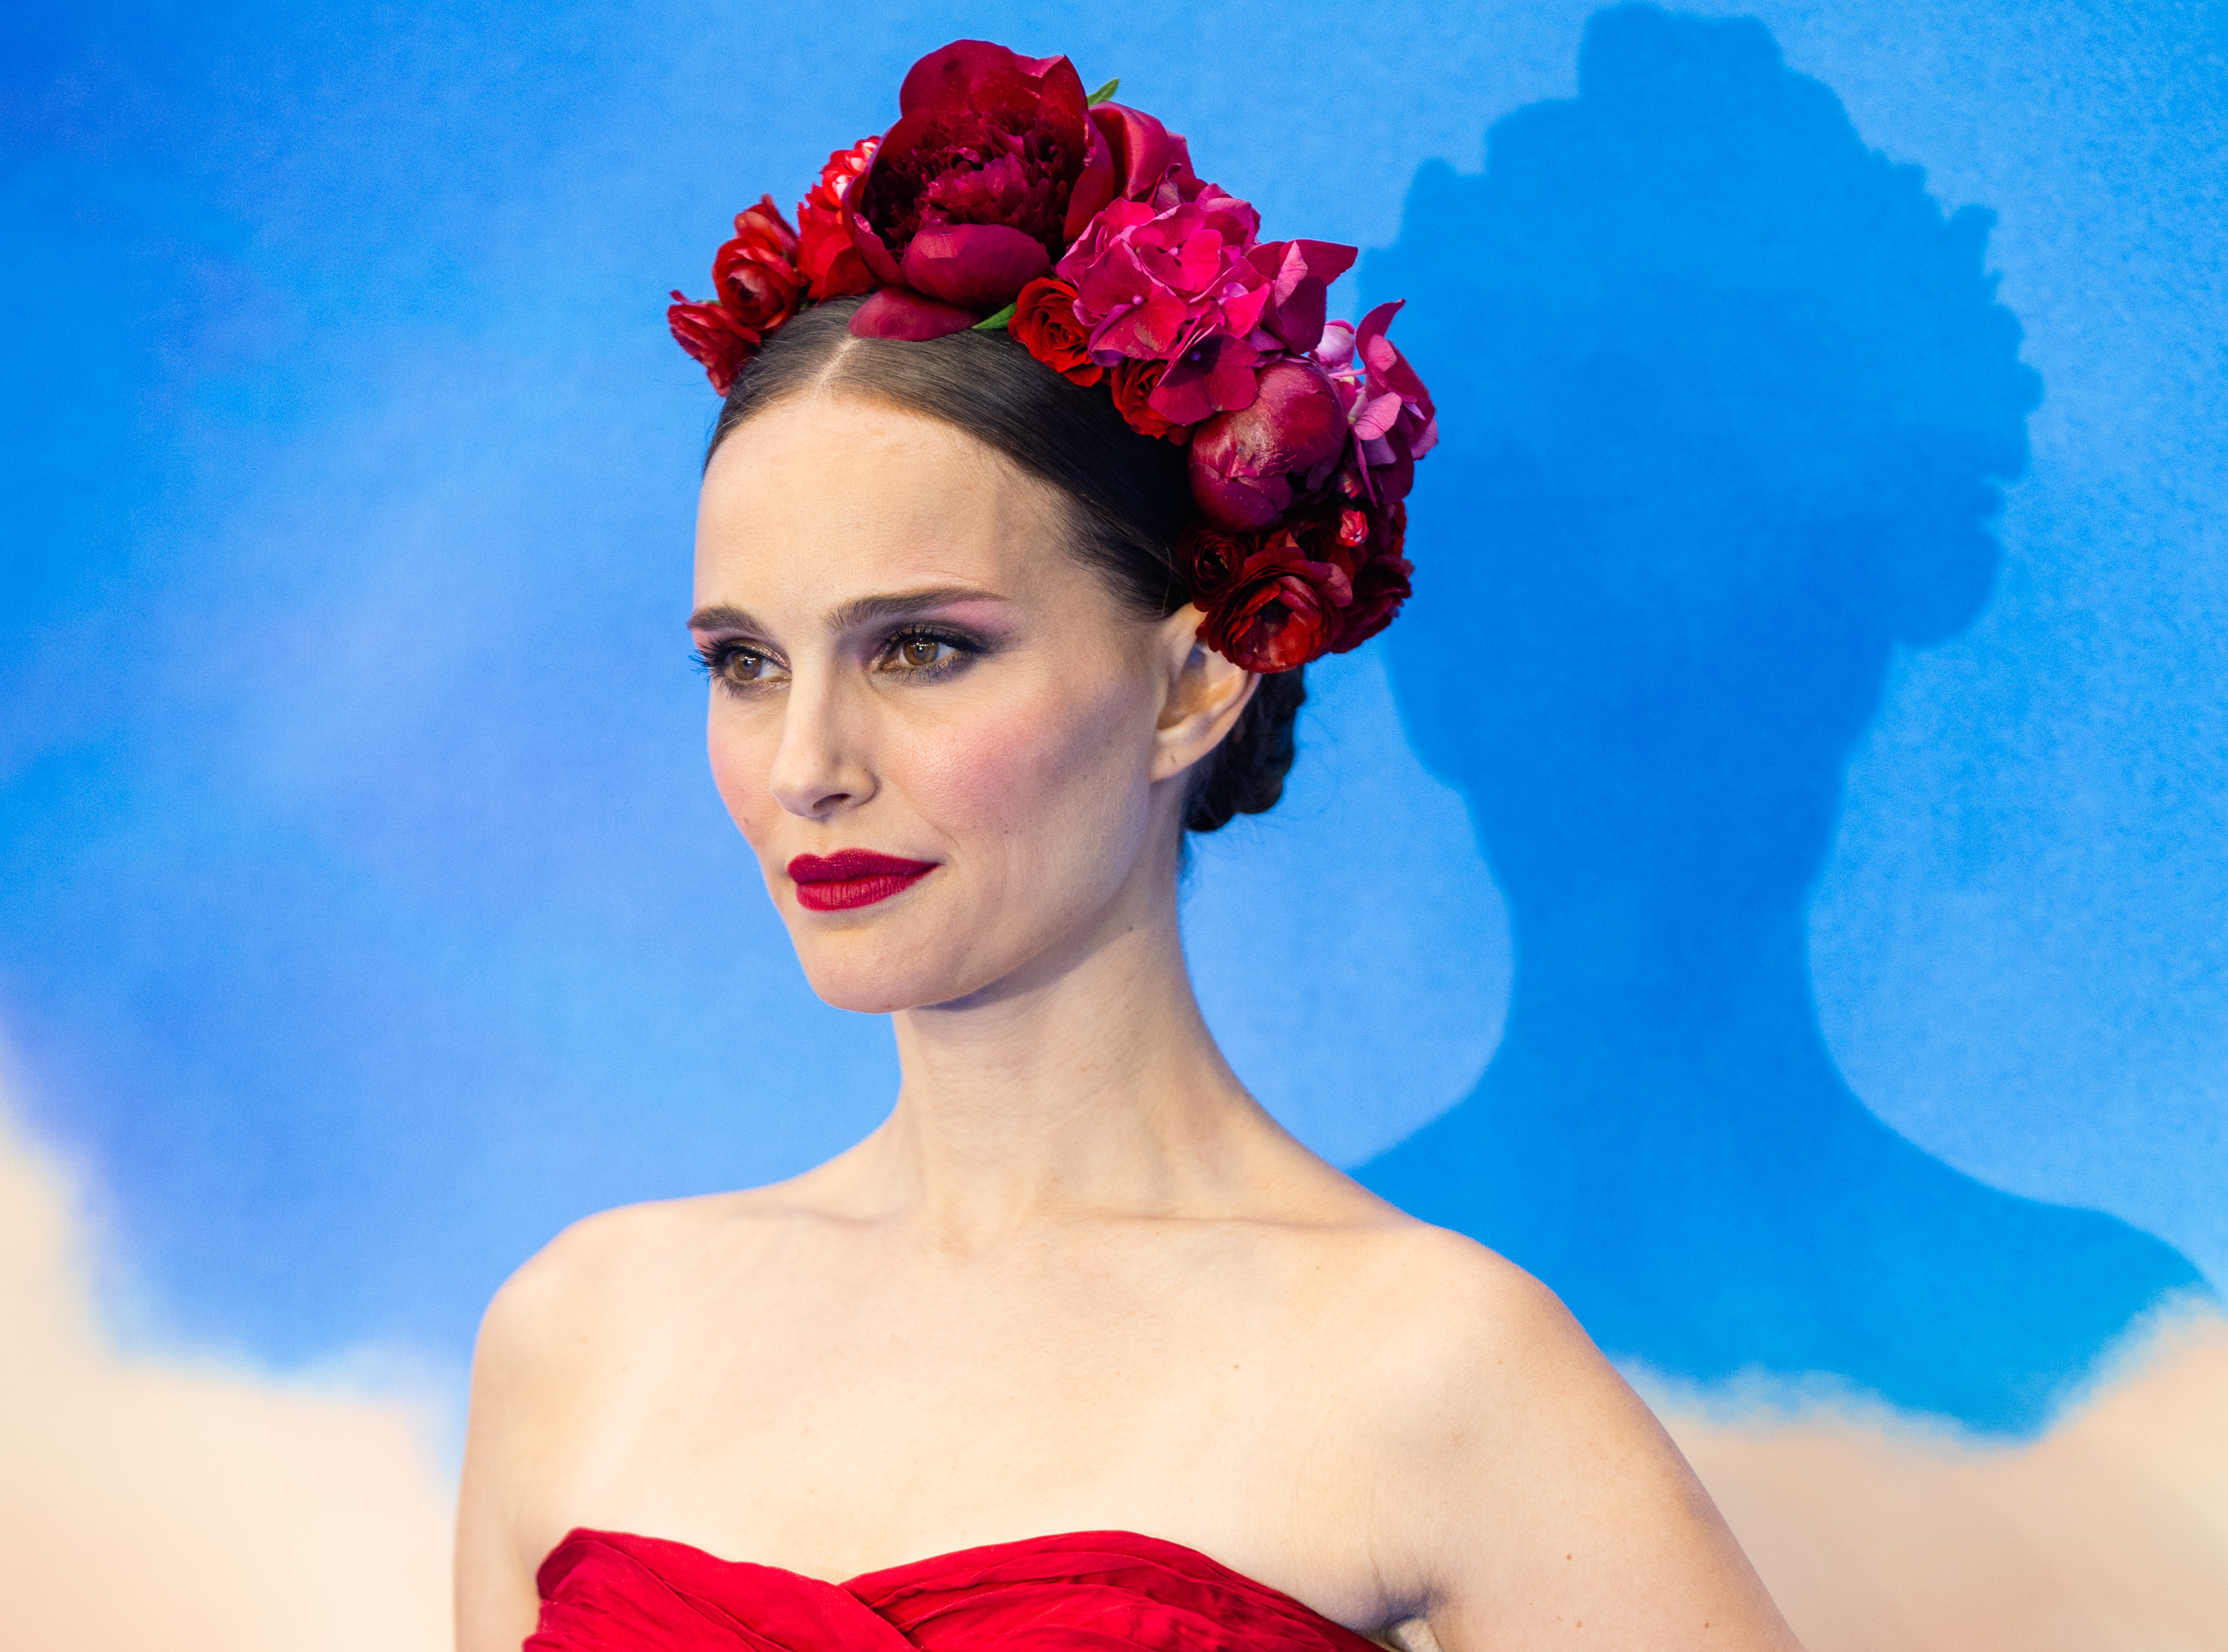 Natalie Portman, who stars in 'Thor: Love and Thunder,' wears a red strapless dress and red flower crown.